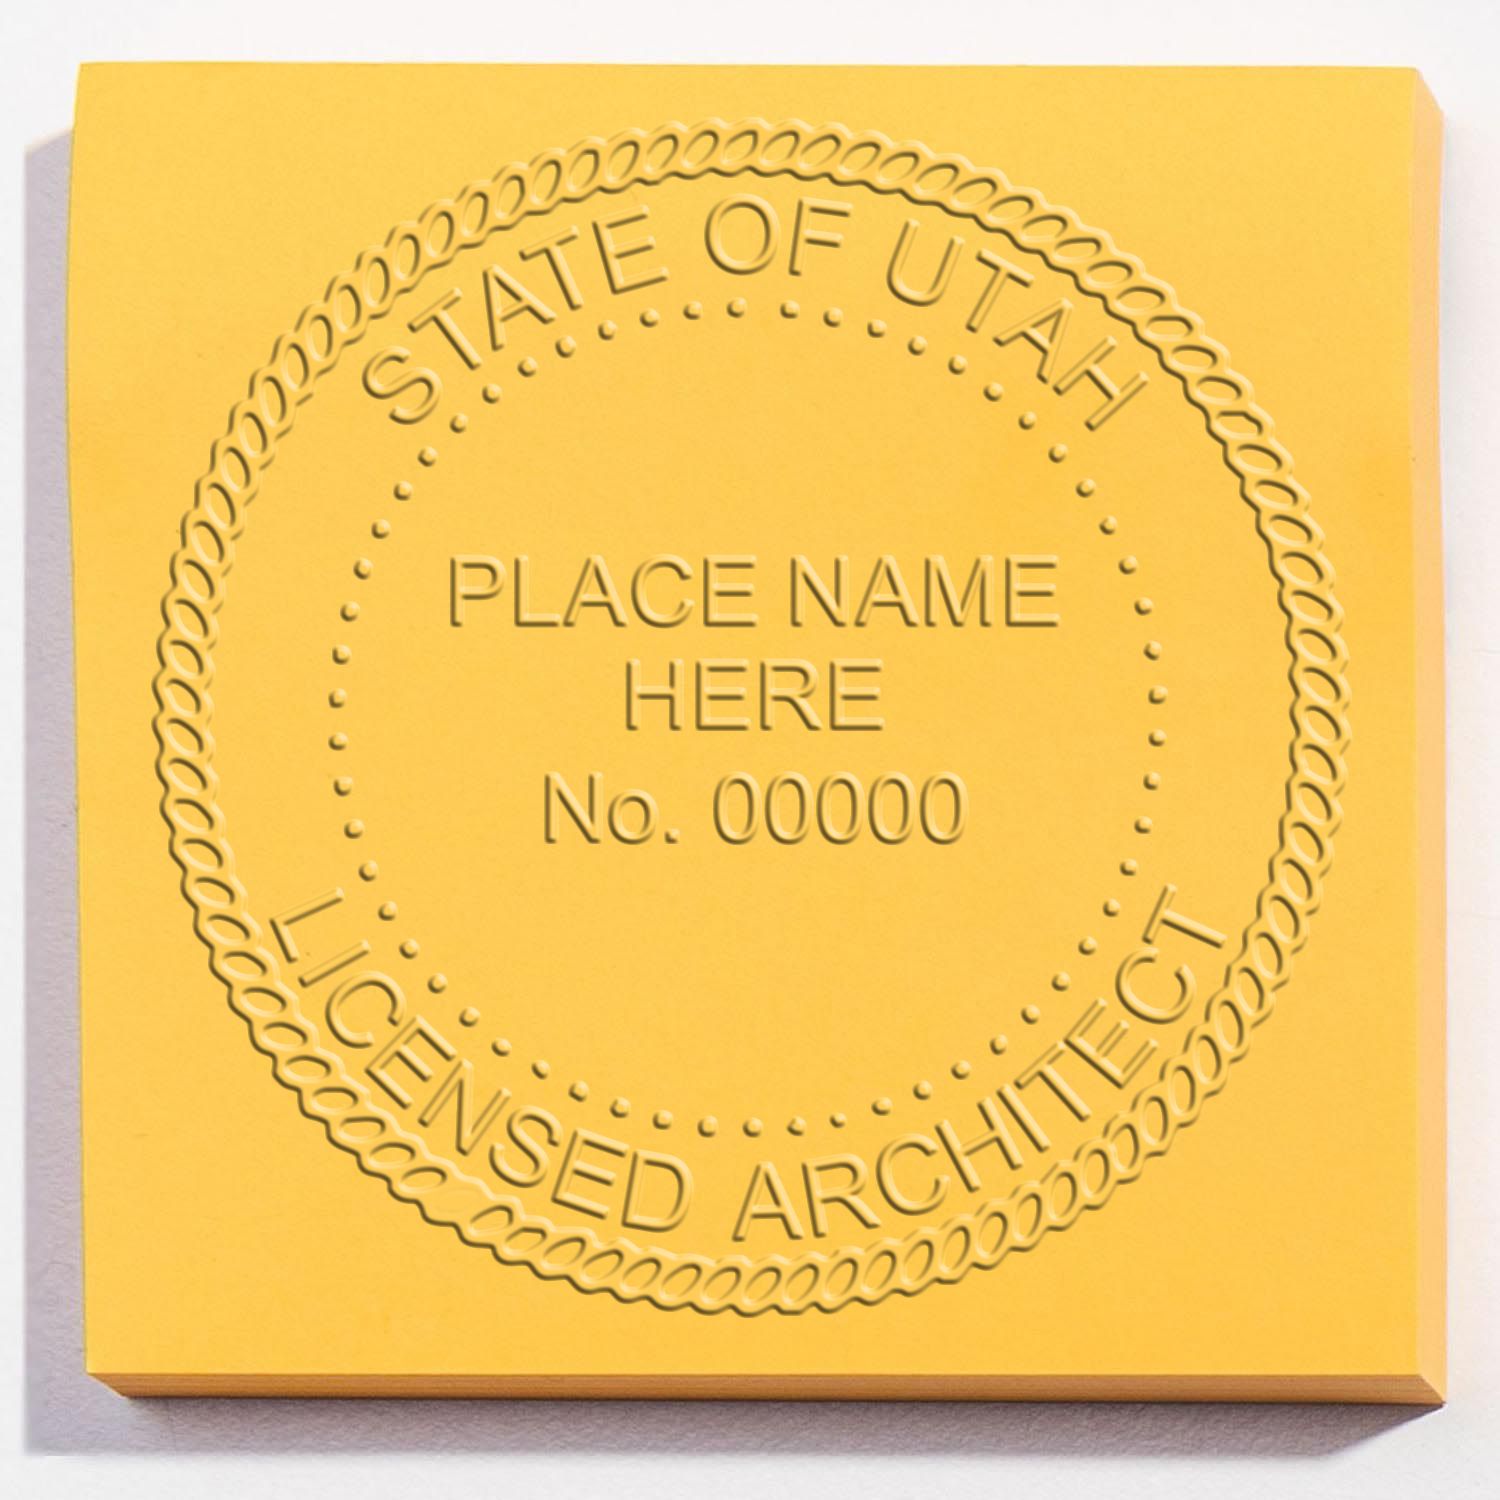 An in use photo of the Hybrid Utah Architect Seal showing a sample imprint on a cardstock